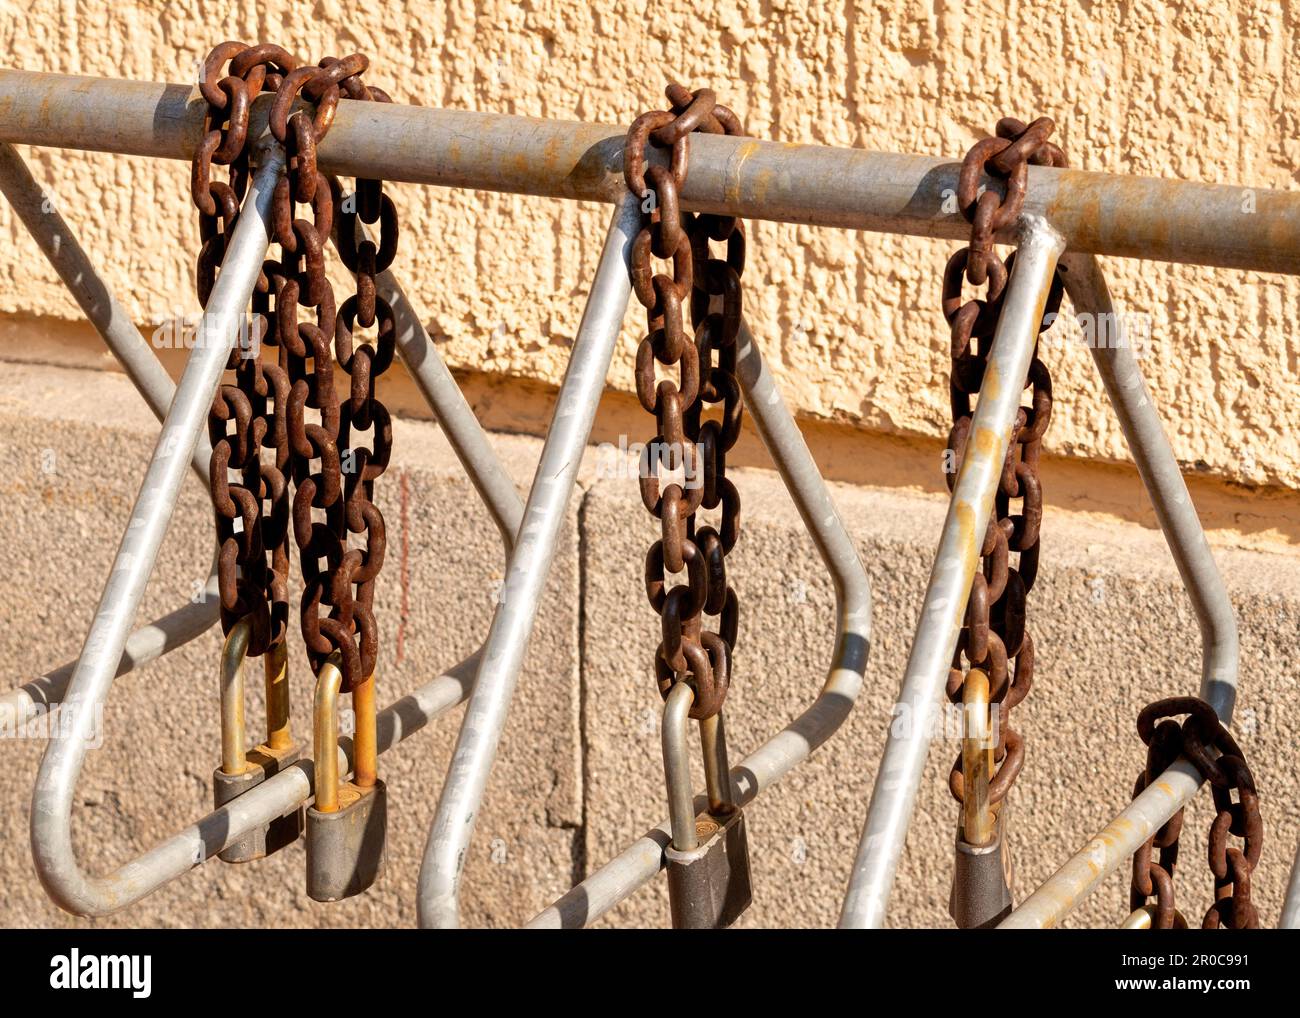 Rusty heavy padlocks and chains attached to bike stand rack Stock Photo